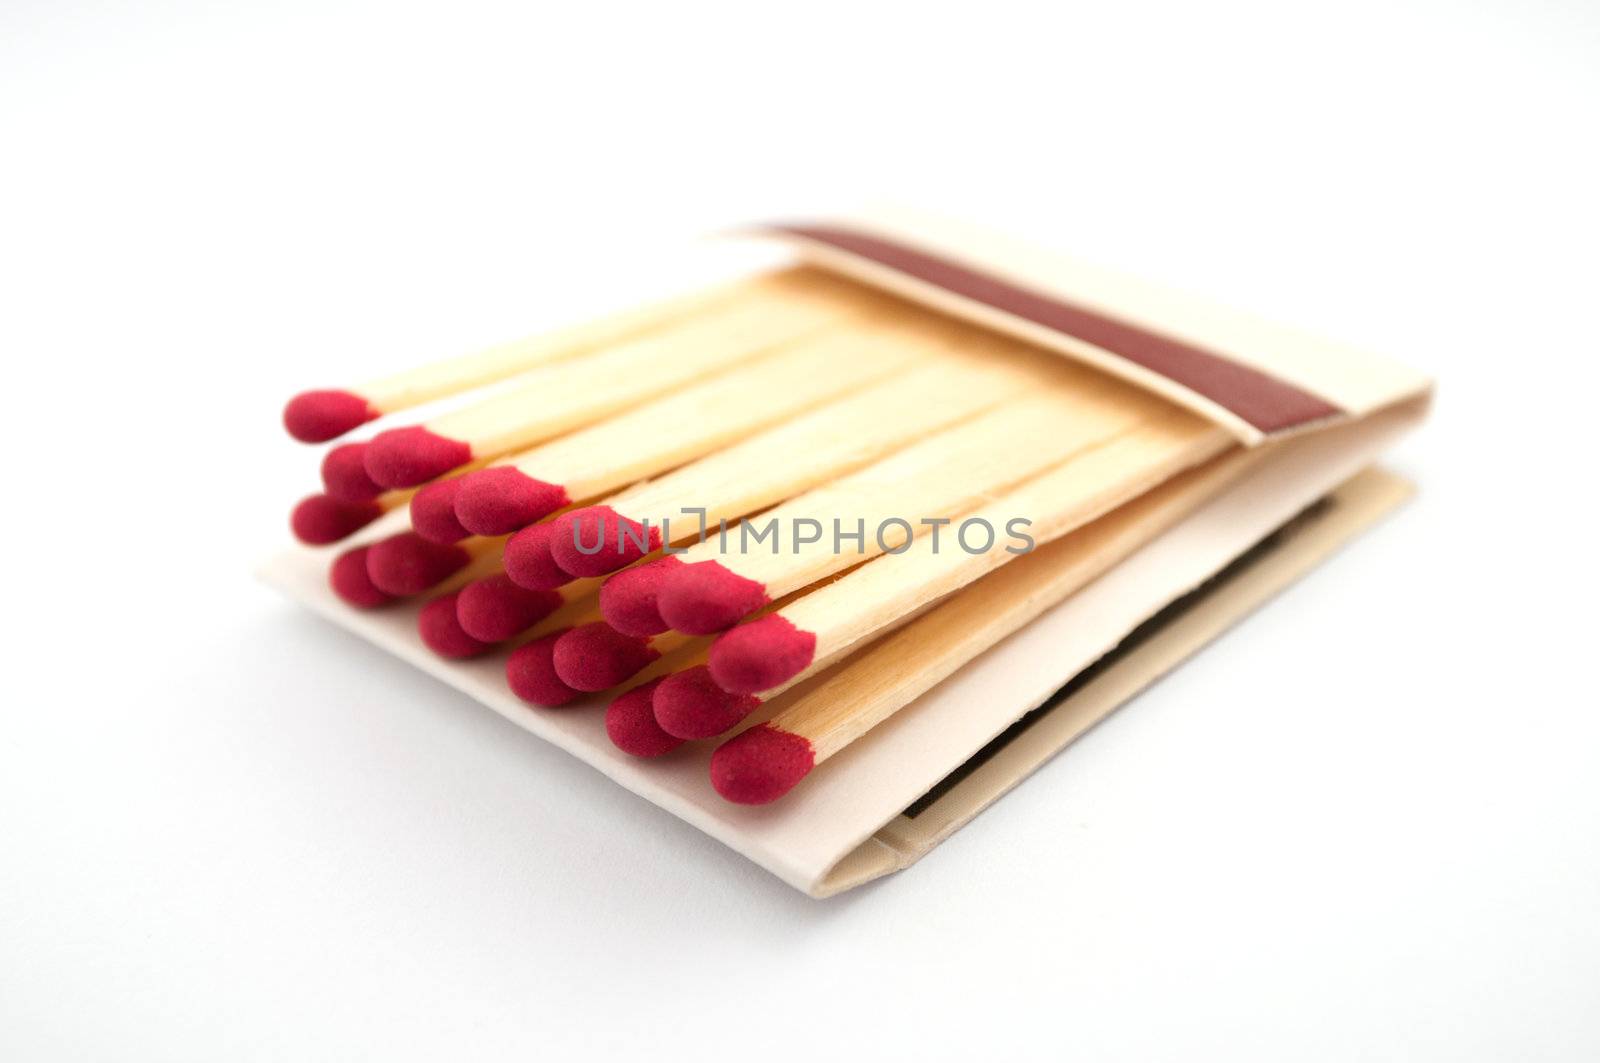 Matchbox on white by catalinr